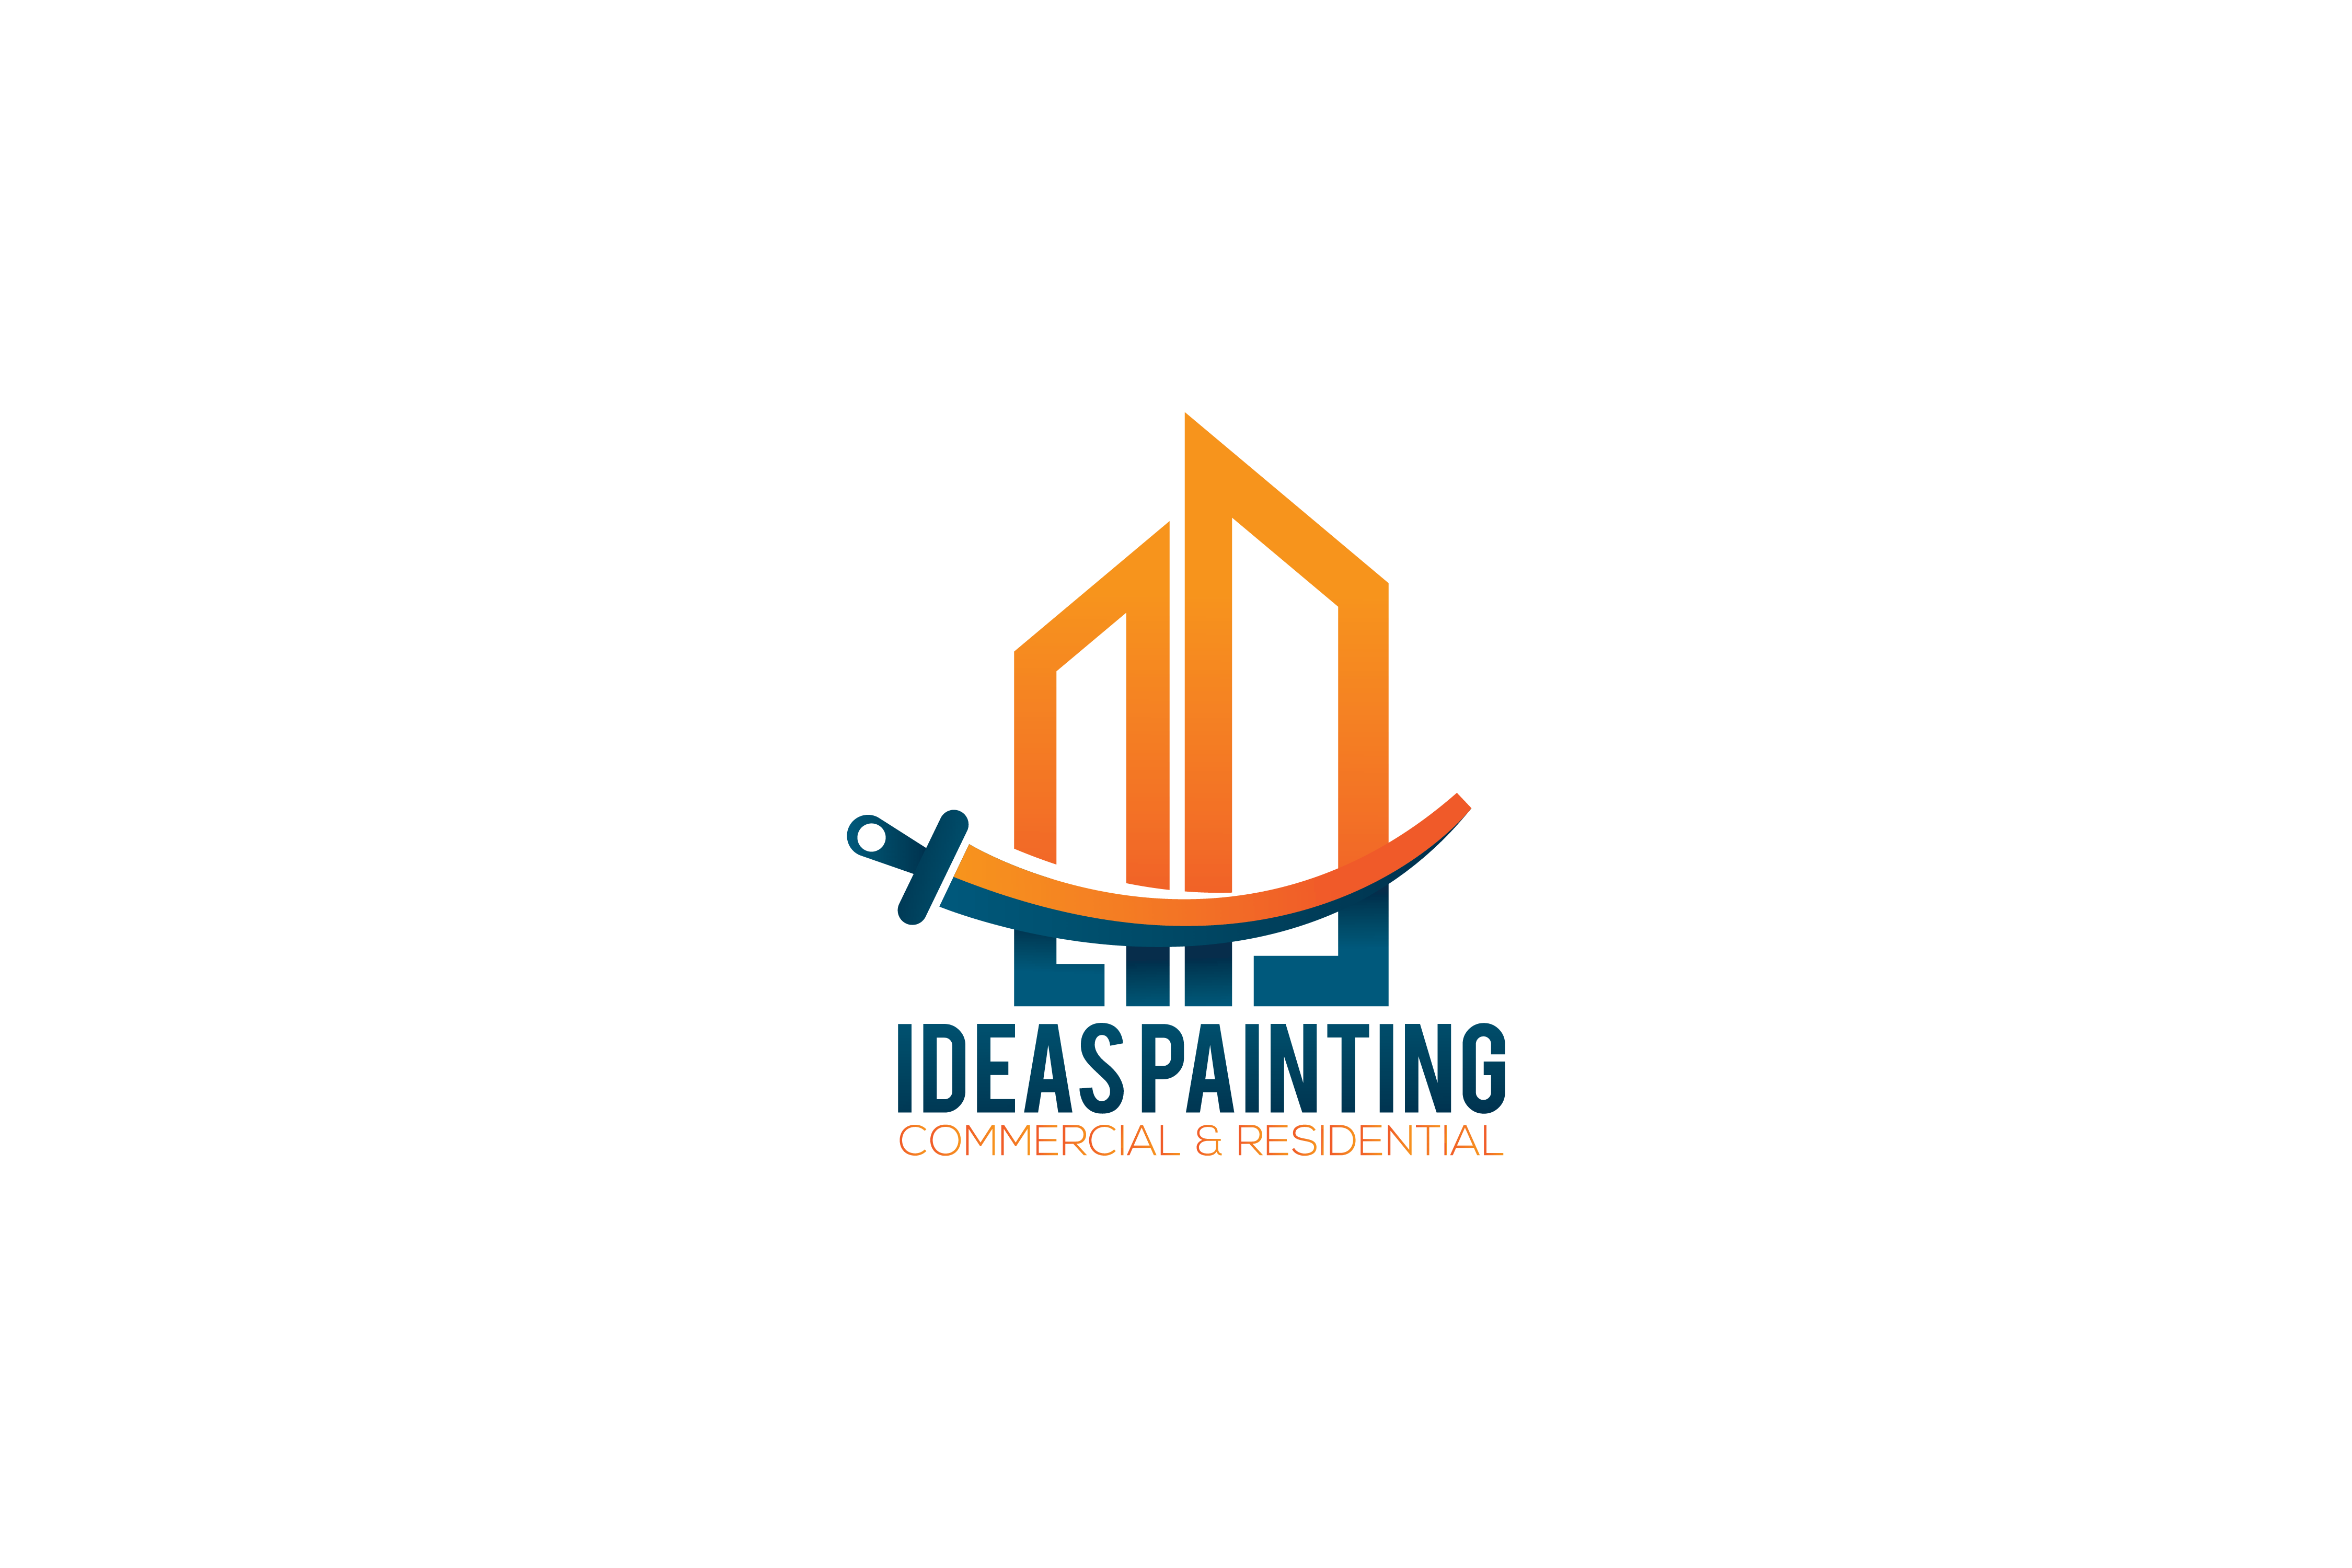 Ideas Painting - Residential & Commercial Painting